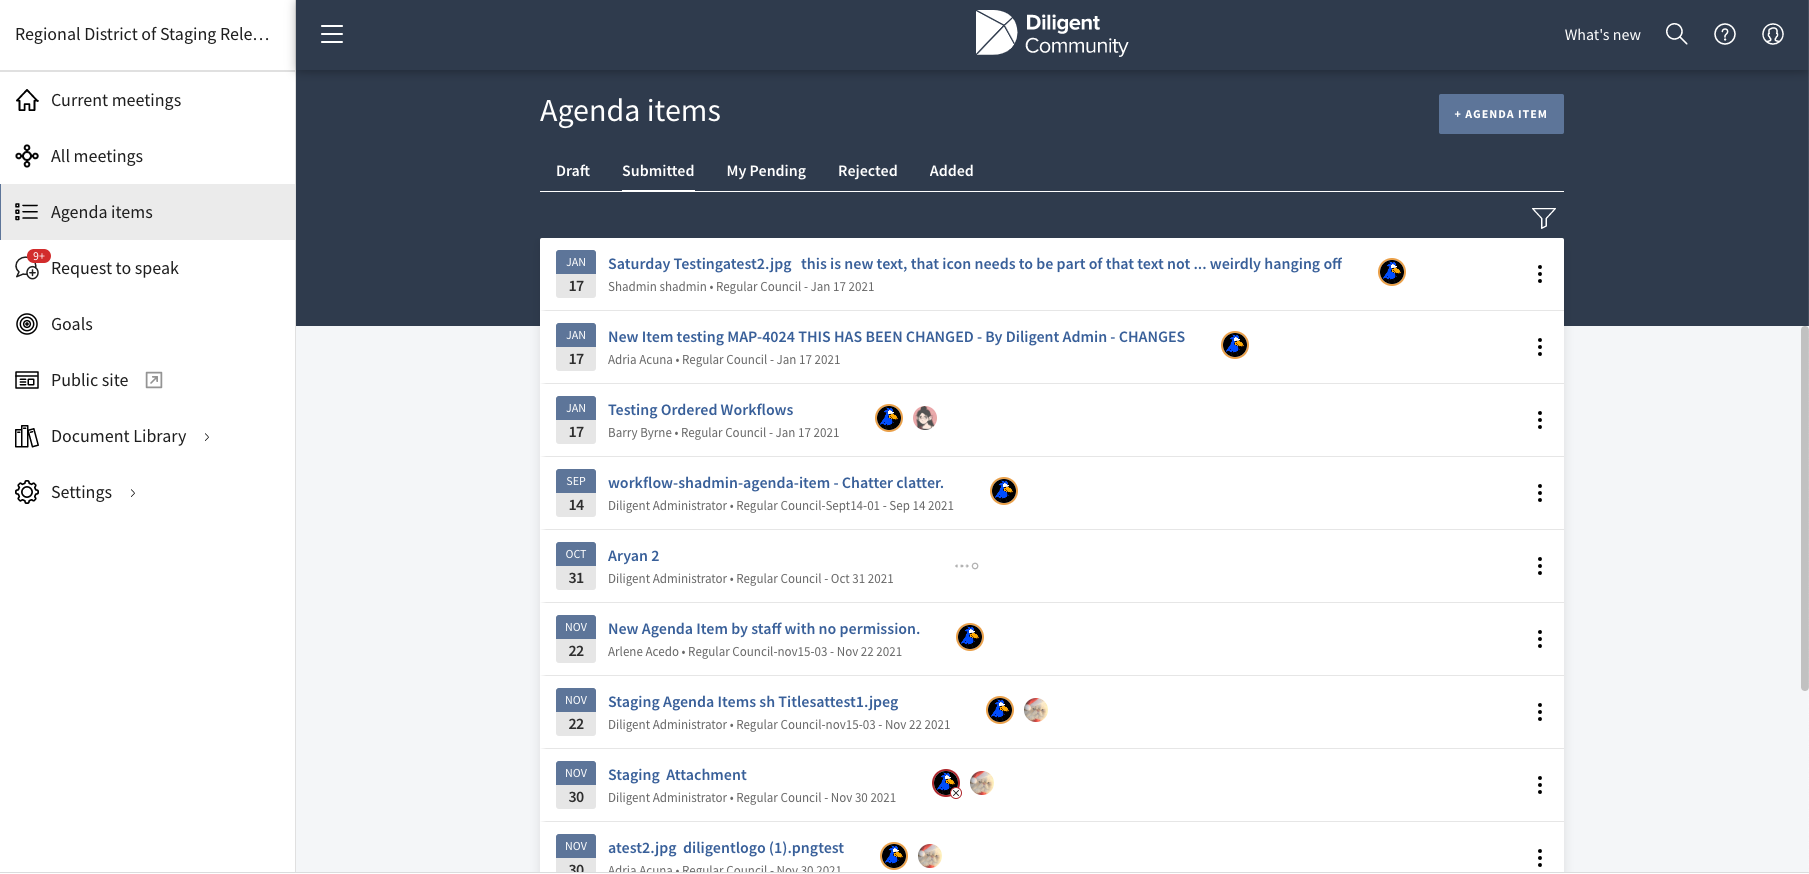 Agenda items page allows to monitor the progress of an agenda item from submitted to pending, then approved or rejected.